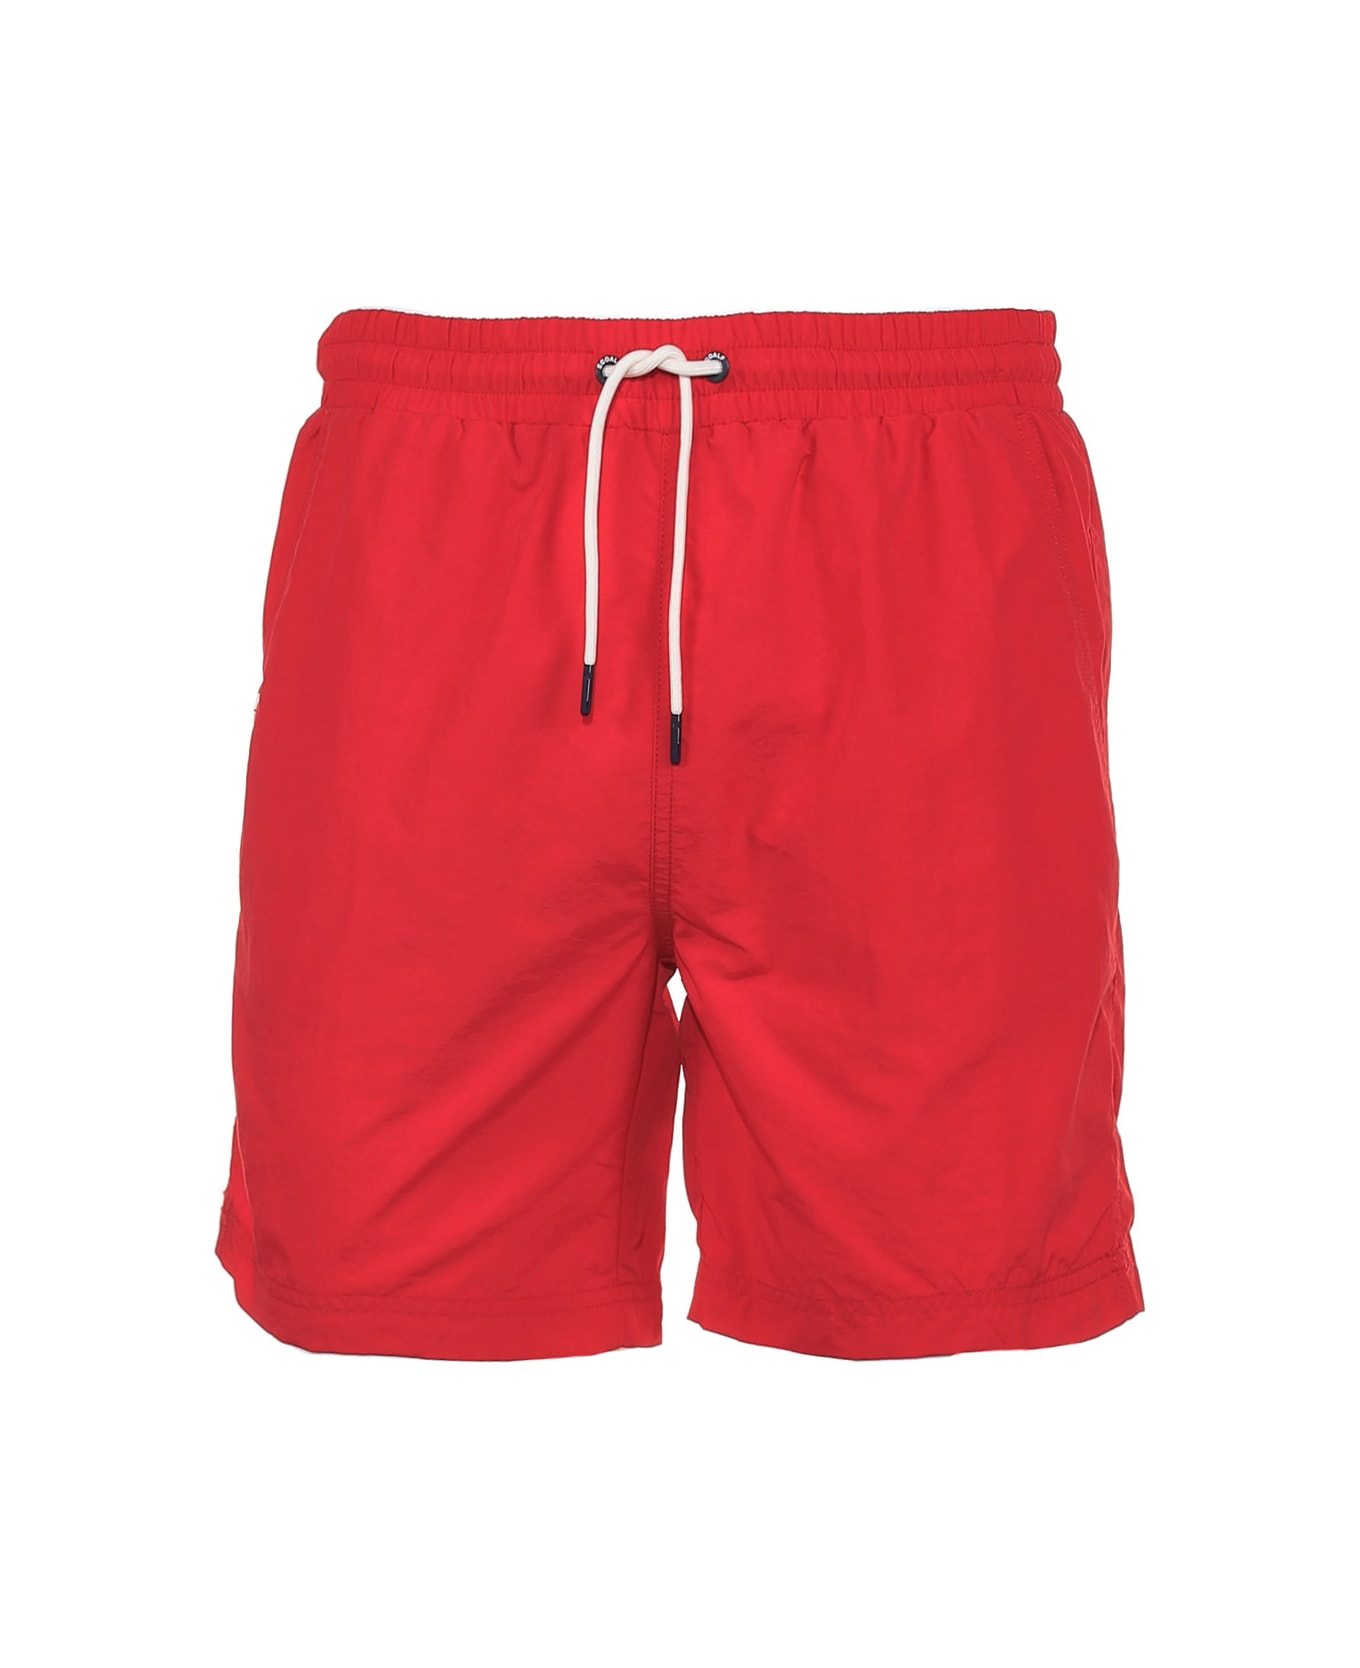 Ecoalf Swimsuit With Drawstring At The Waist - BRIGHT RED